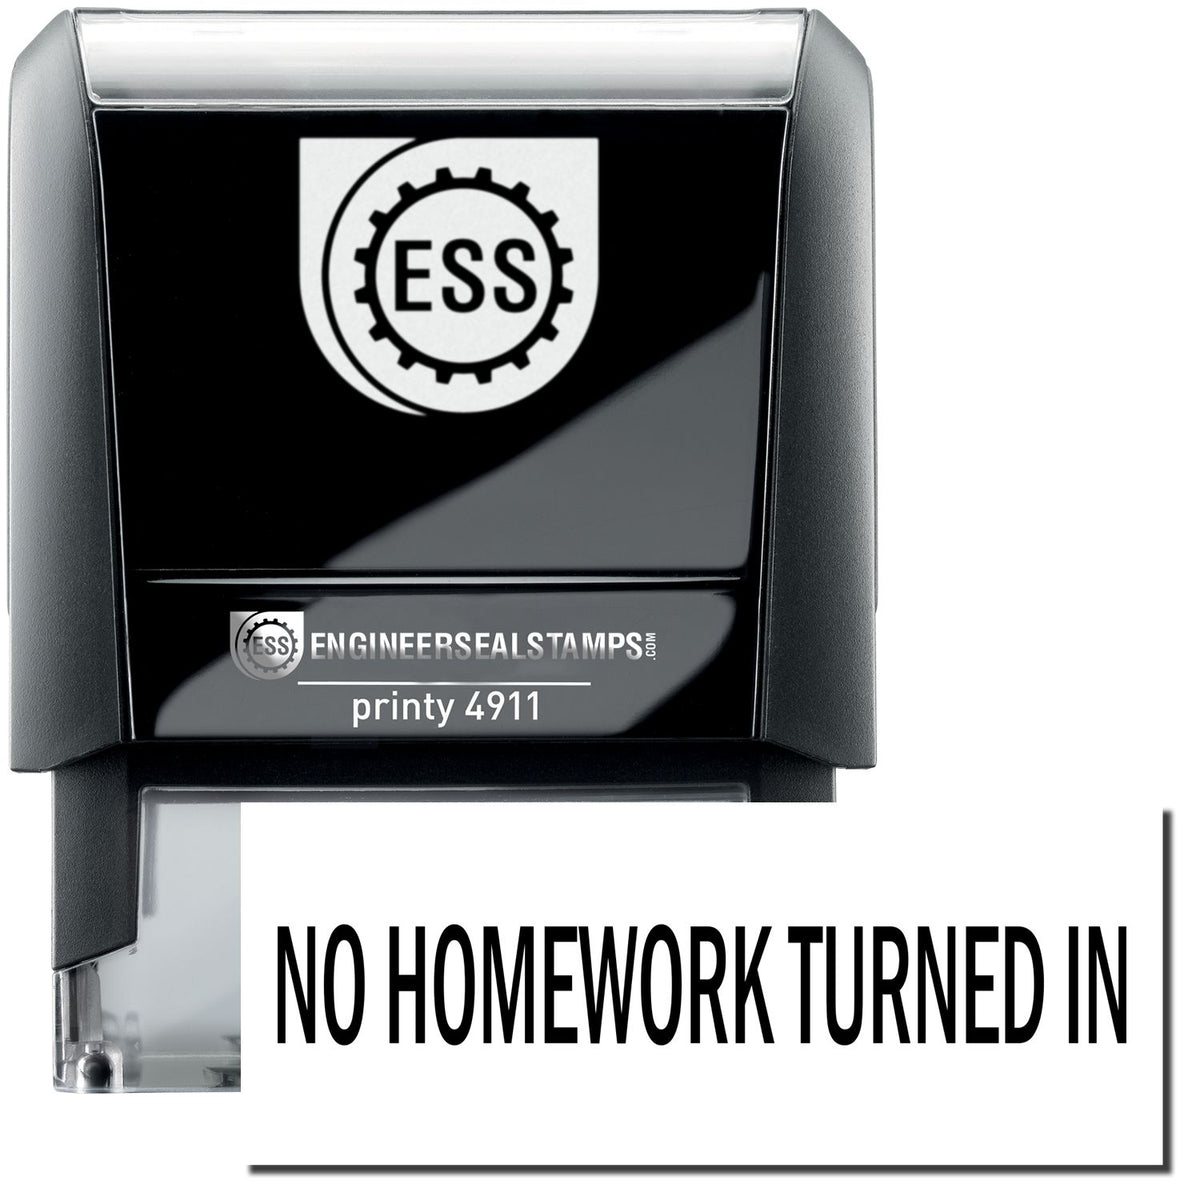 A self-inking stamp with a stamped image showing how the text &quot;NO HOMEWORK TURNED IN&quot; is displayed after stamping.